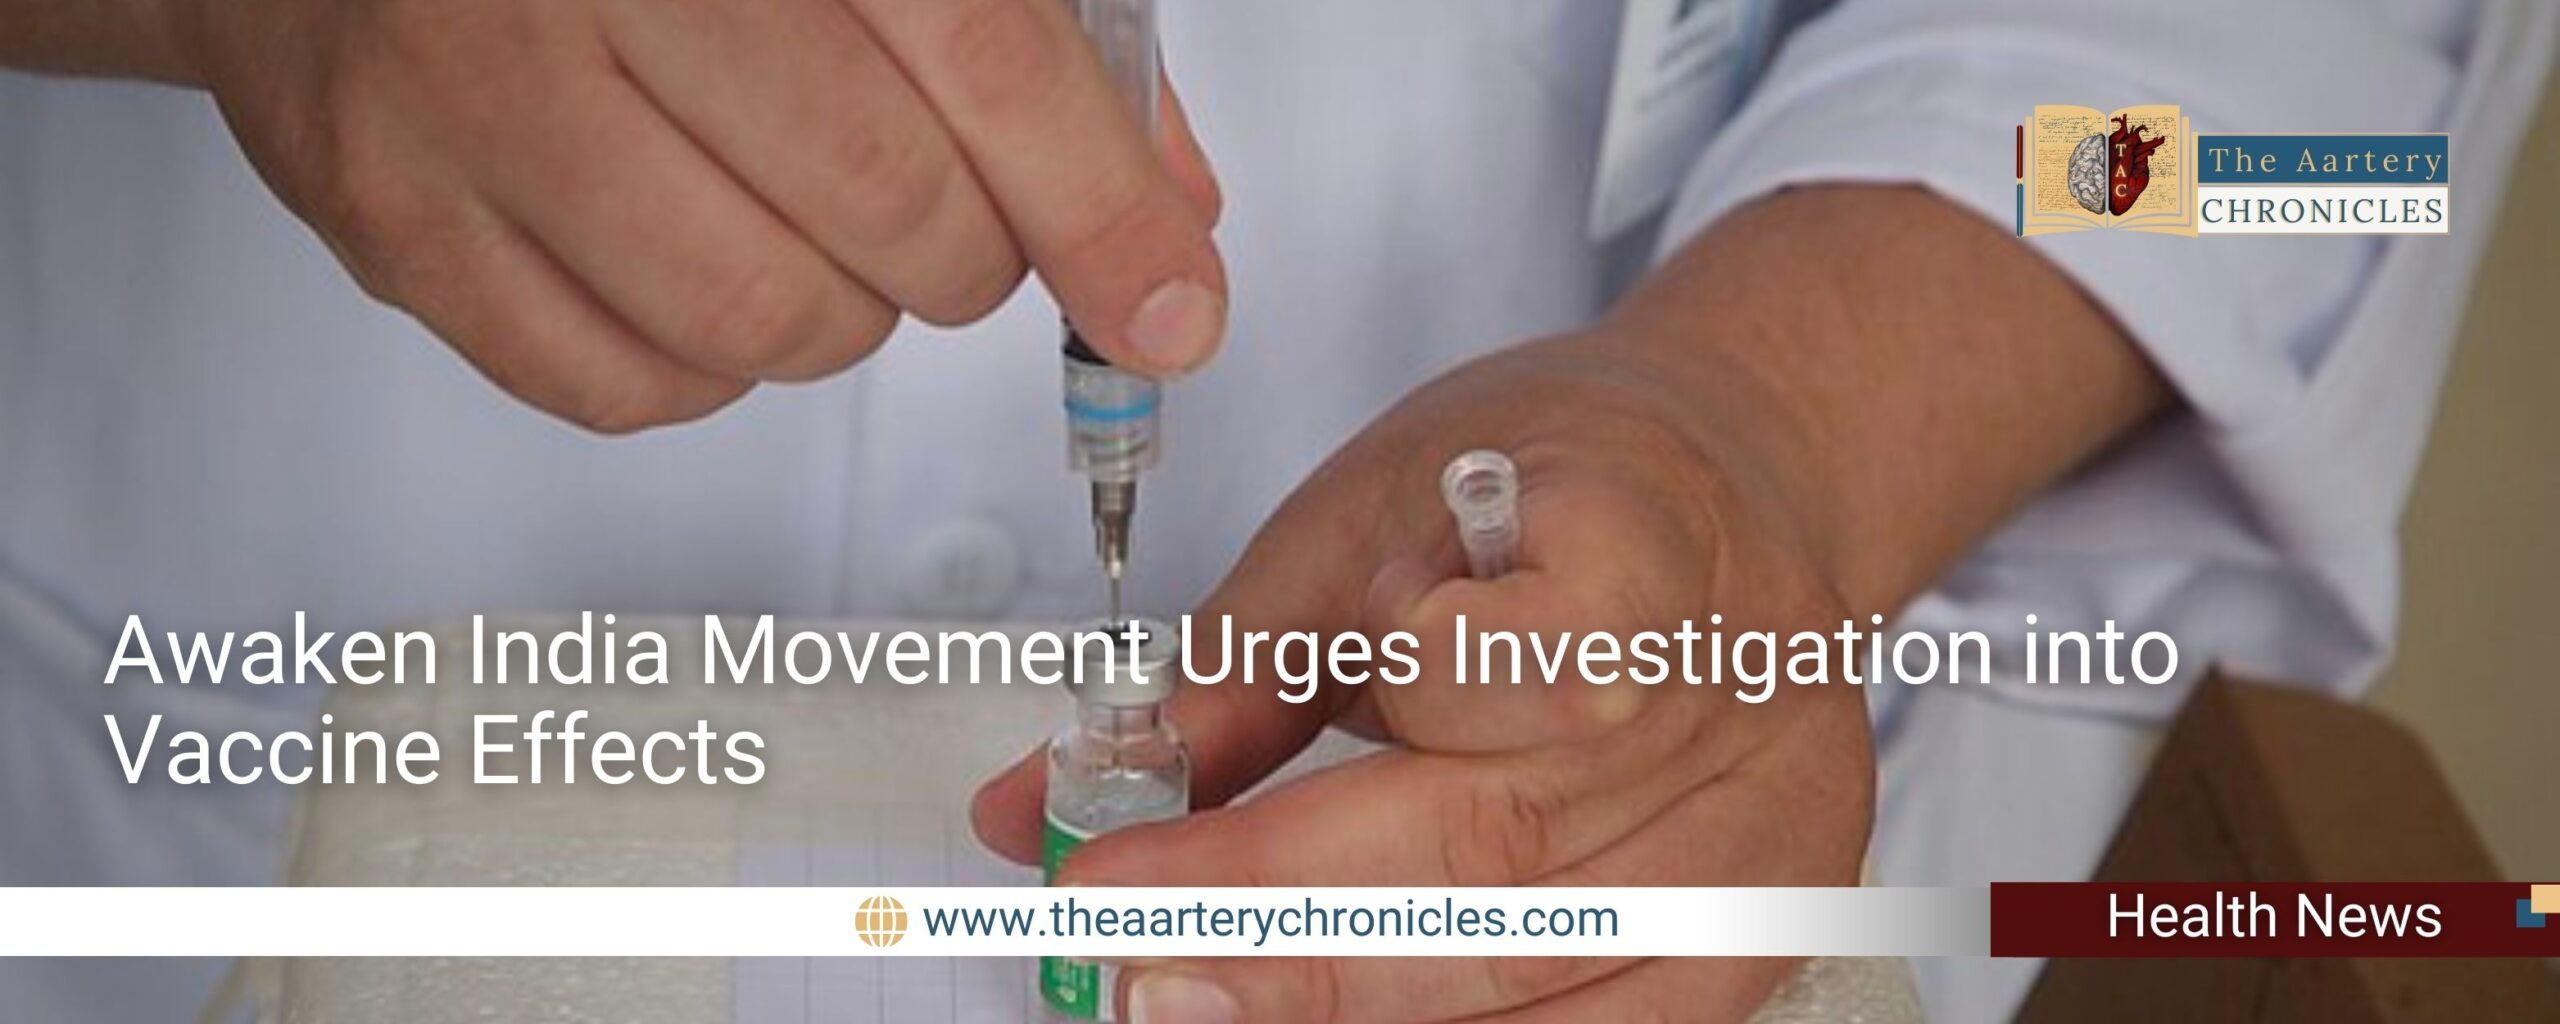 Awaken-India-Movement-Urges-Investigation-into-Vaccine-Effects​-THE-Aartery-chronicles-tac